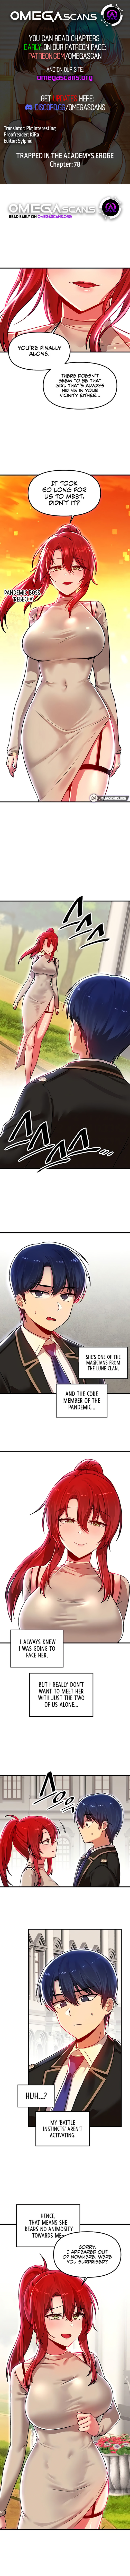 Panel Image 1 for chapter 78 of manhwa Trapped in the Academy